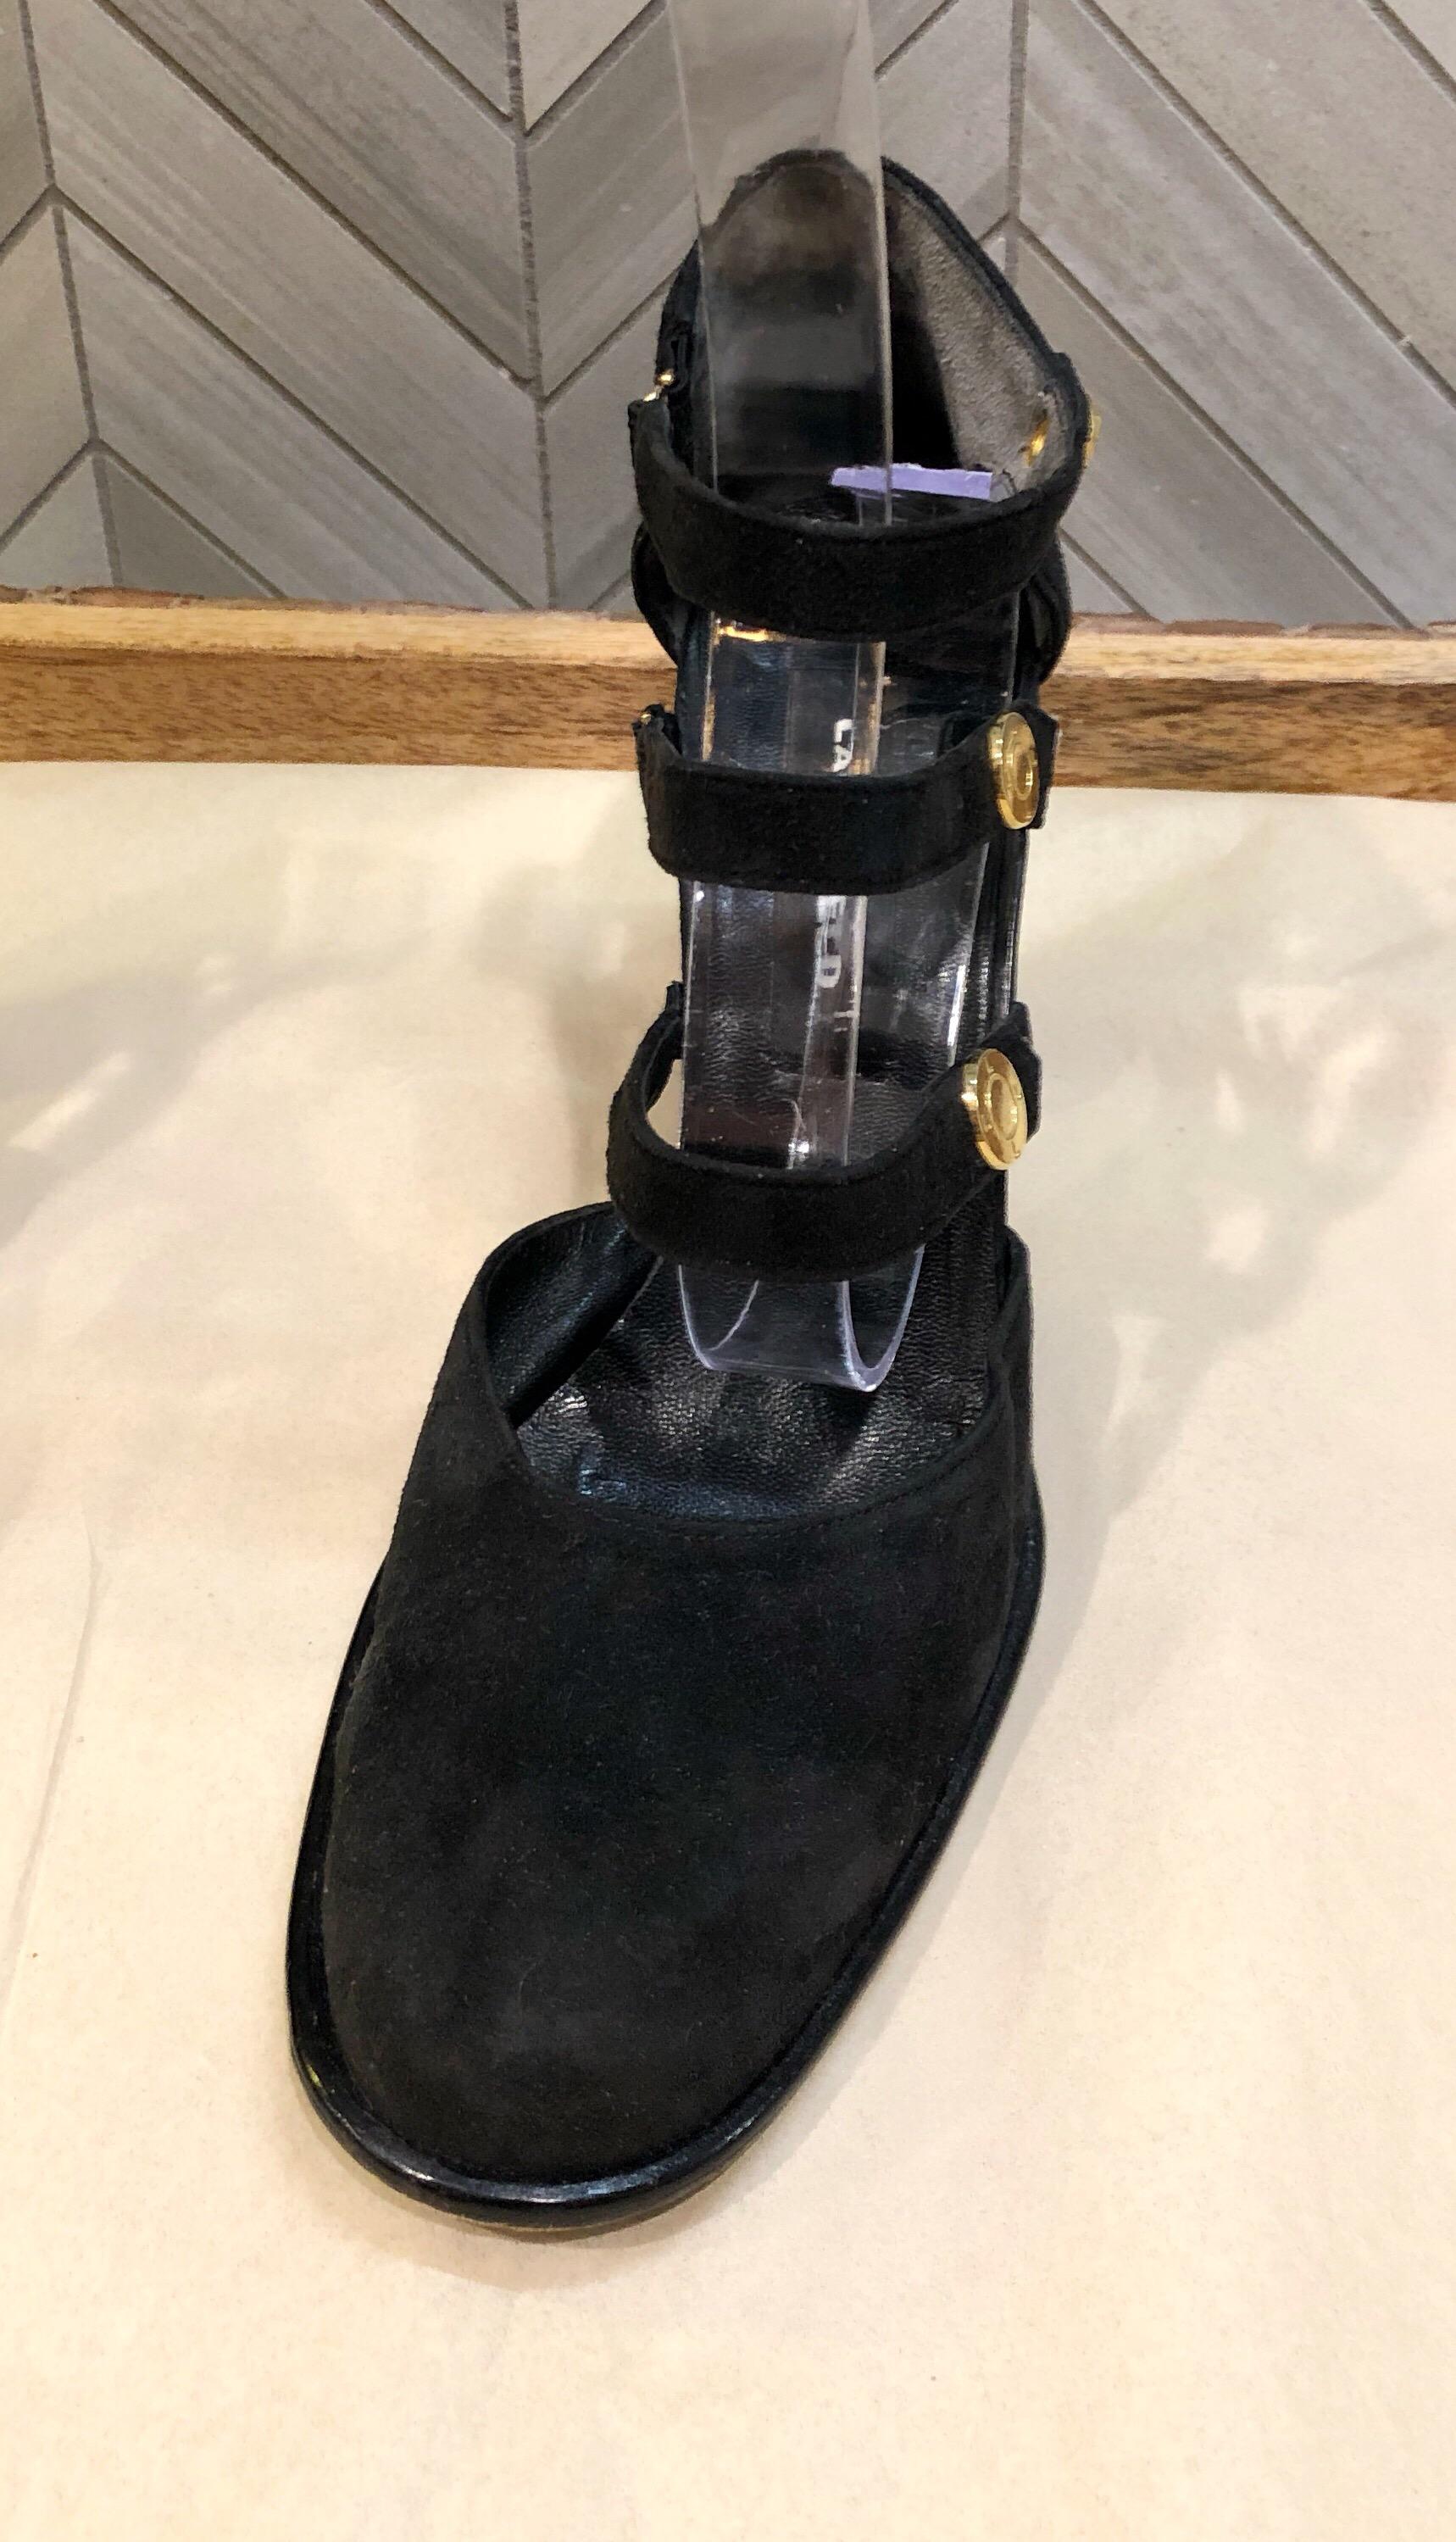 Collectible vintage 90s KARL LAGERFELD black suede leather bondage inspired high heel shoes! Features three straps across the ankle with elastic at each side. Gold logo encrusted studs at each outter strap. Block like heel makes it easy for all day